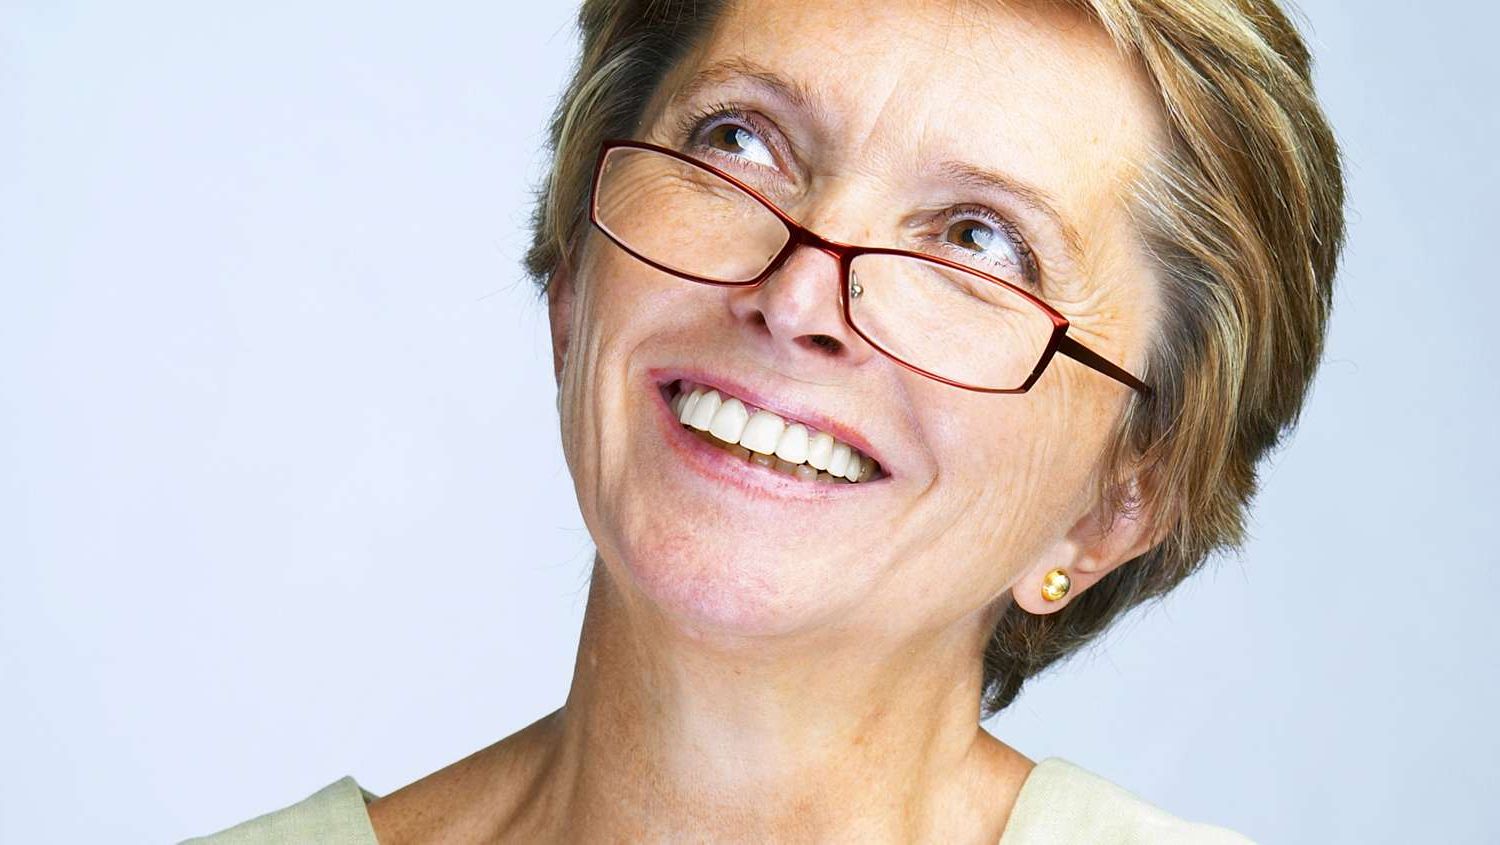 Learn About The Best Short Hairstyles For Women Over 60 With Glasses Throughout Short Hairstyles For Women With Glasses (View 24 of 25)